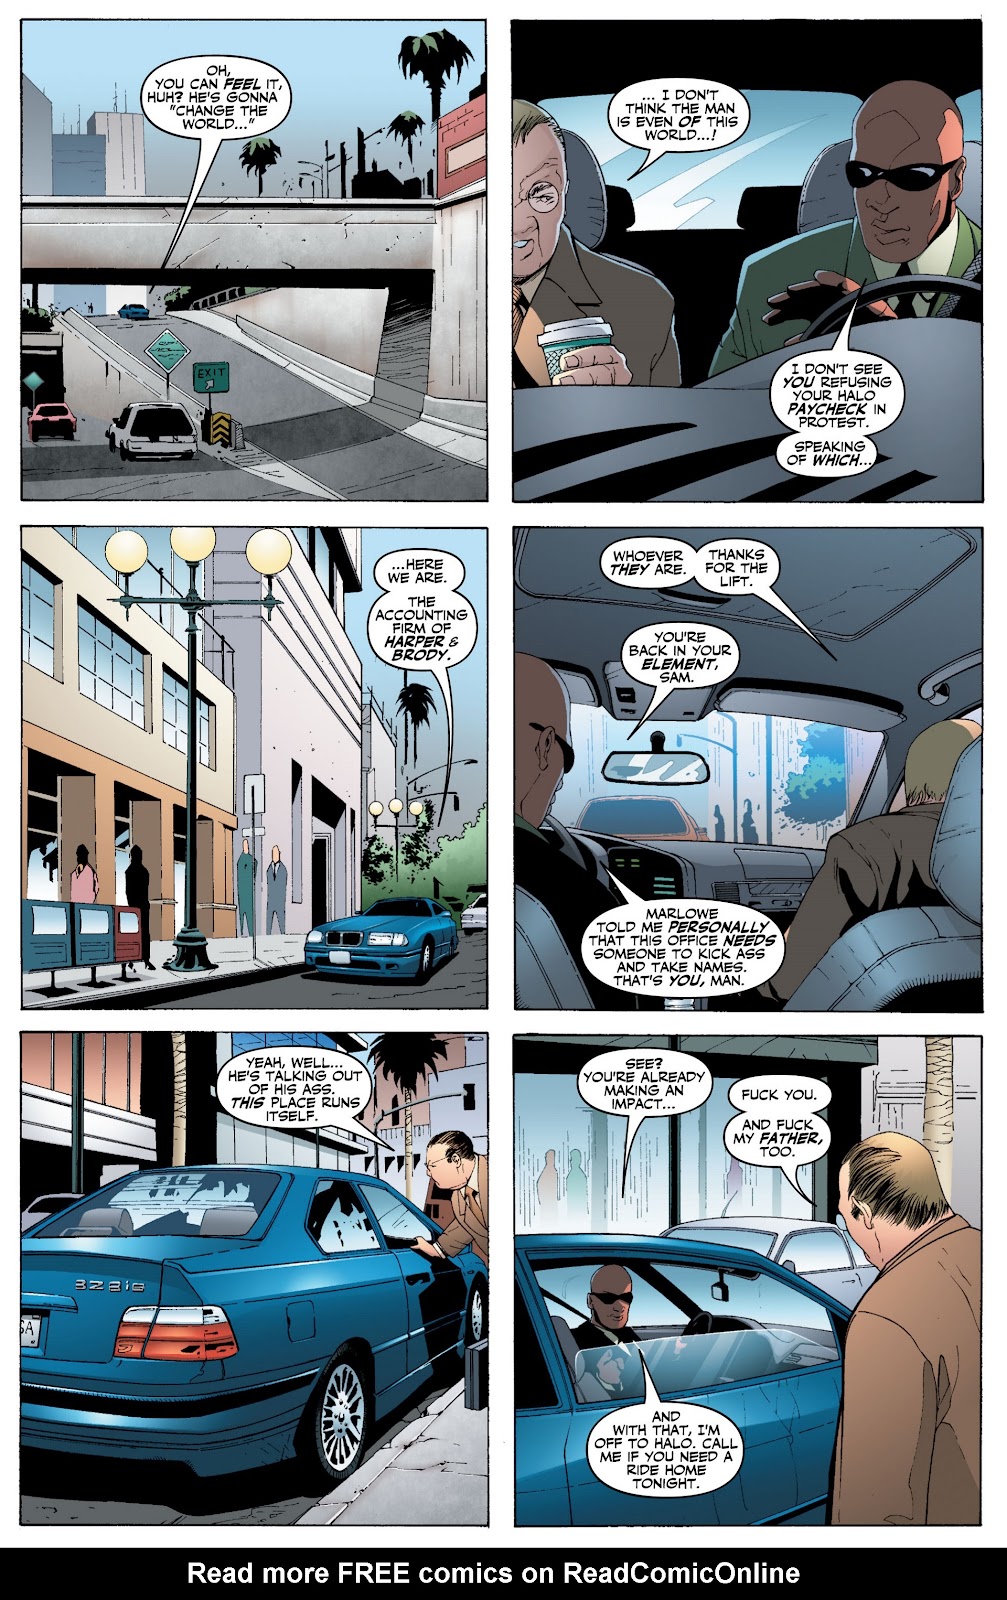 Wildcats Version 3.0 Issue #6 #6 - English 6